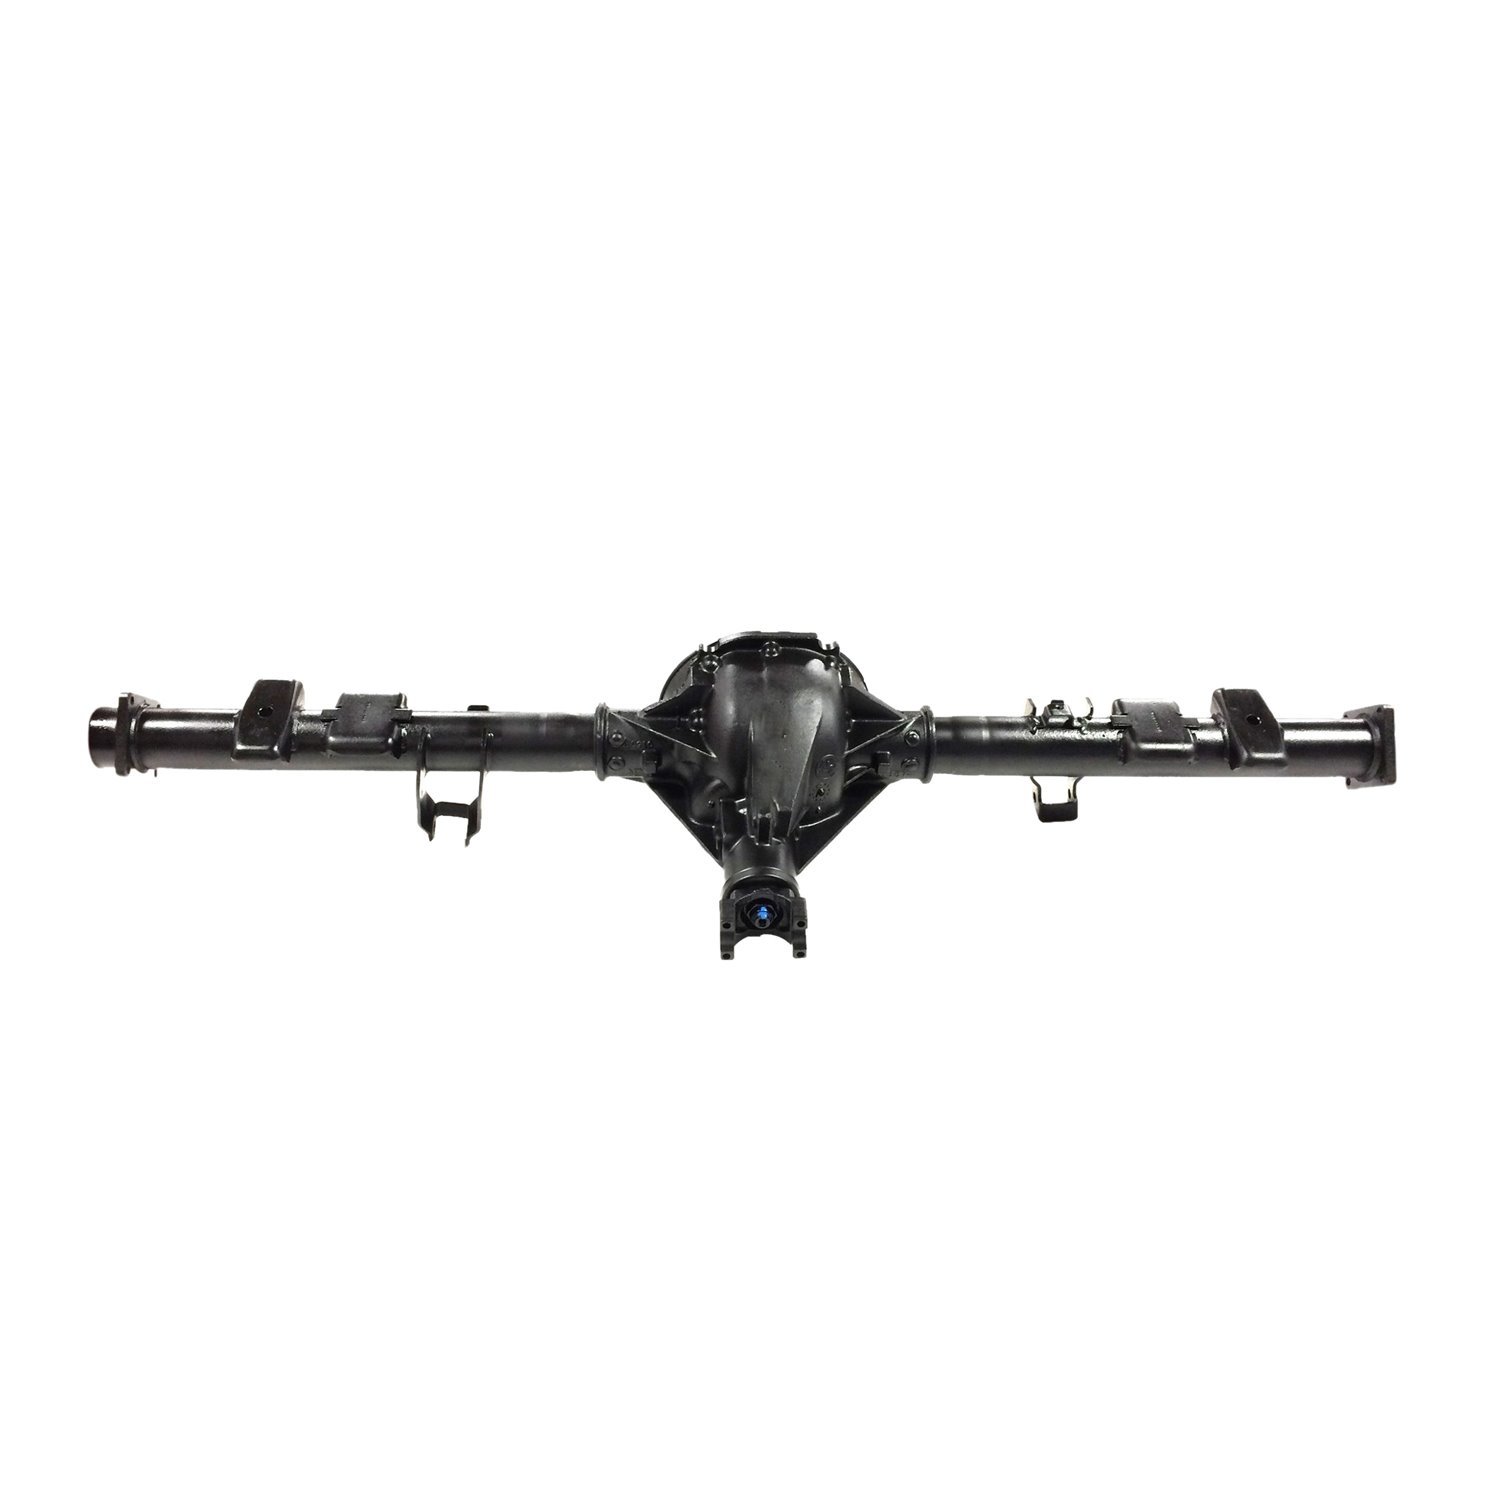 Remanufactured Axle Assy for GM 8.5" 95-97 Chevy S10 Blazer & S15 Jimmy,3.42 2wd